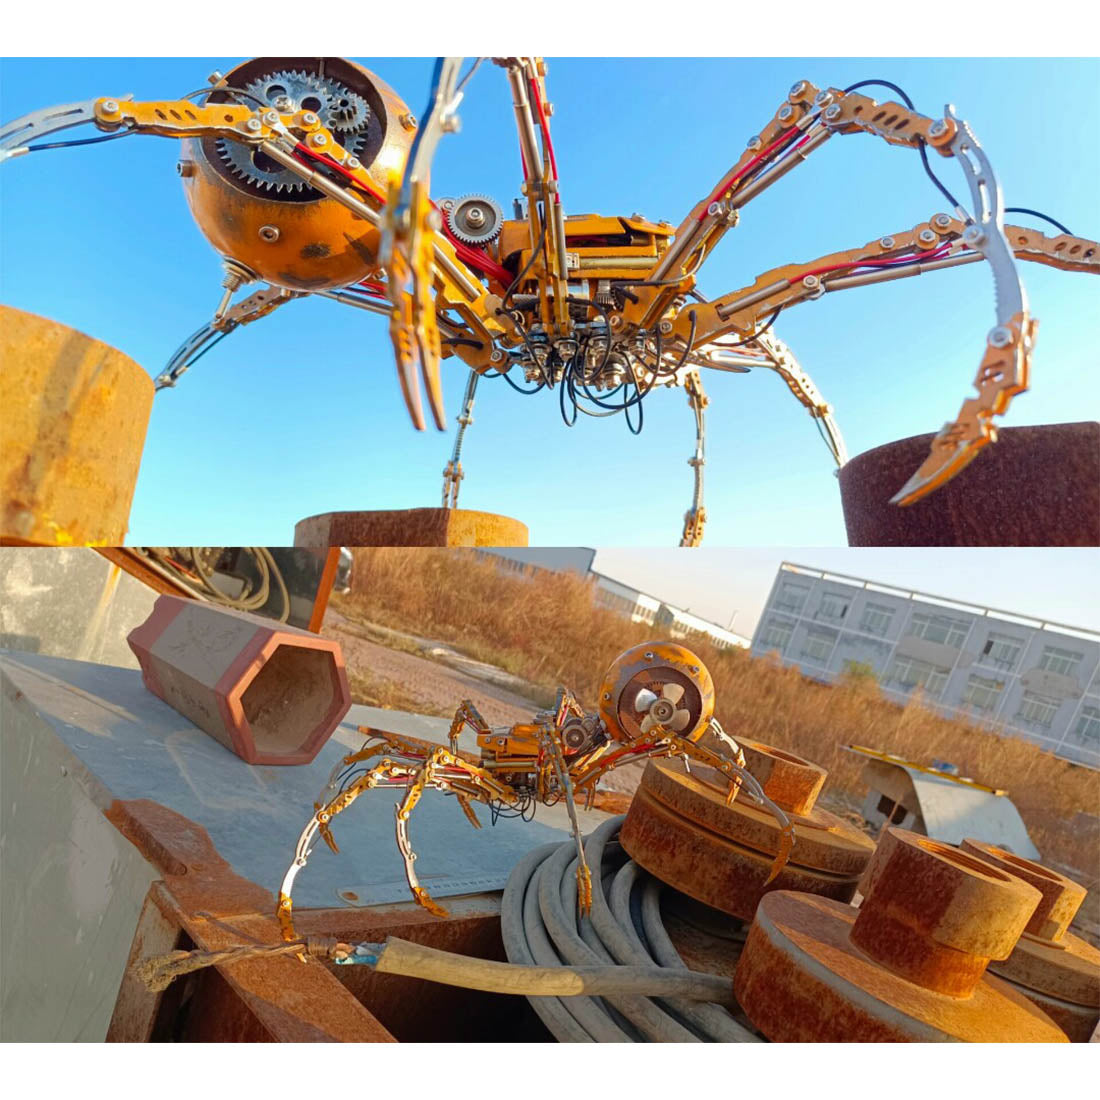 Post-Apocalyptic Jumping Spider Spider 3D Metal Puzzle Kits DIY Desert Punk Assembly